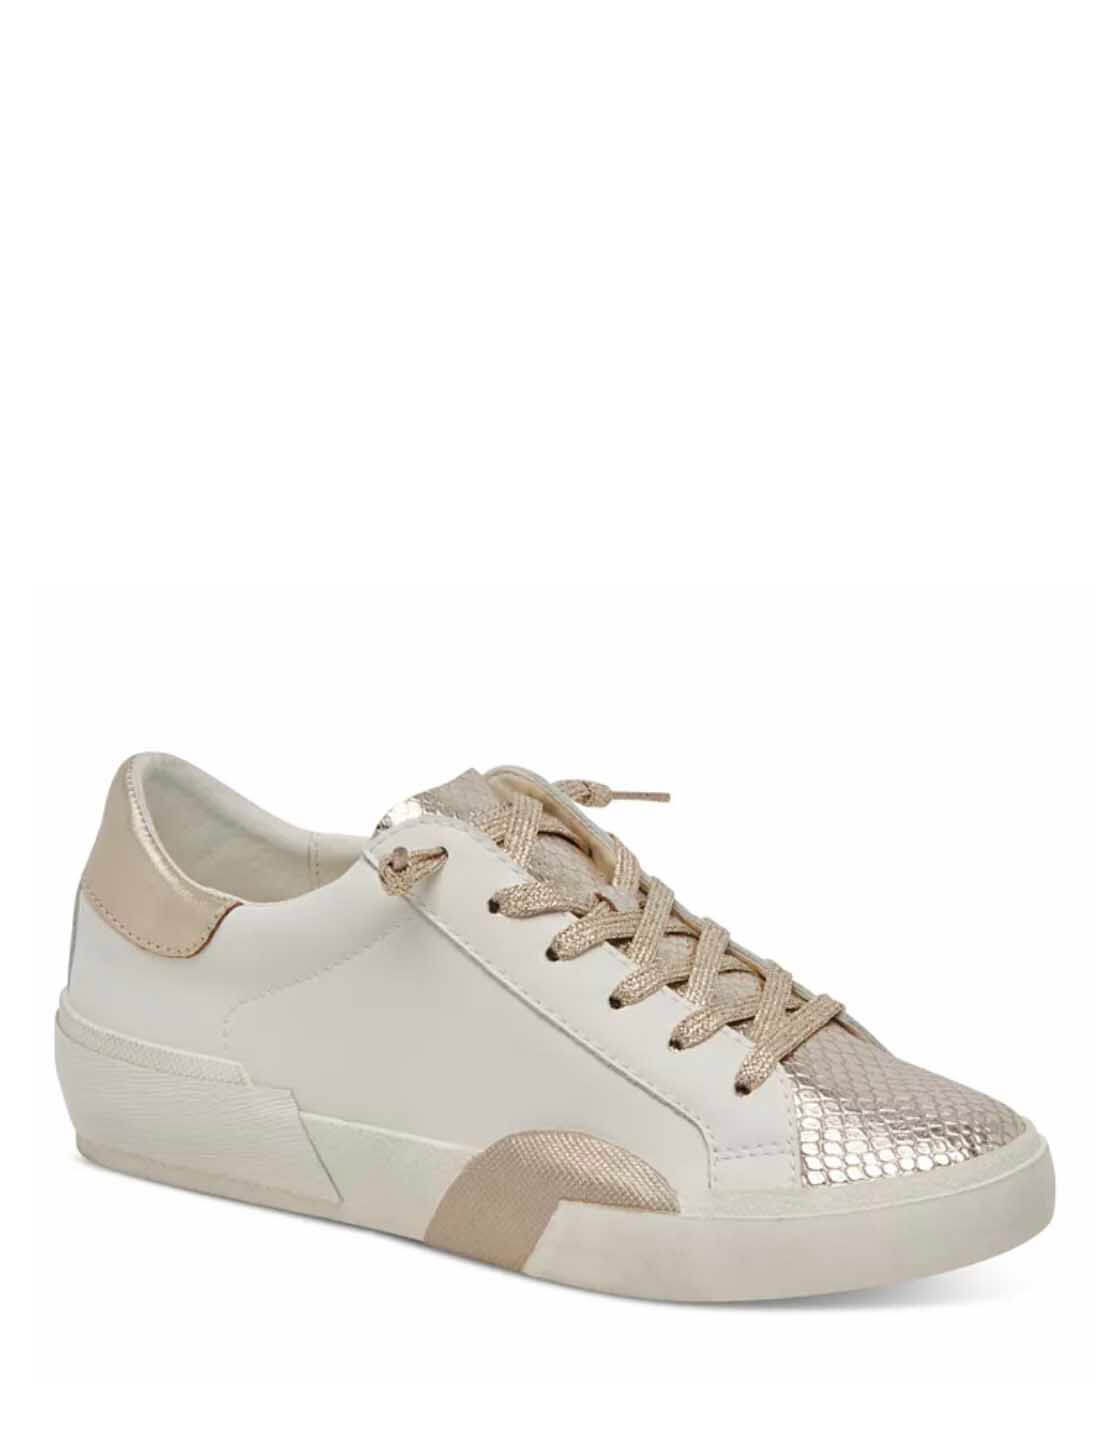 Dolce Vita Zina Sneakers in White/Gold Leather